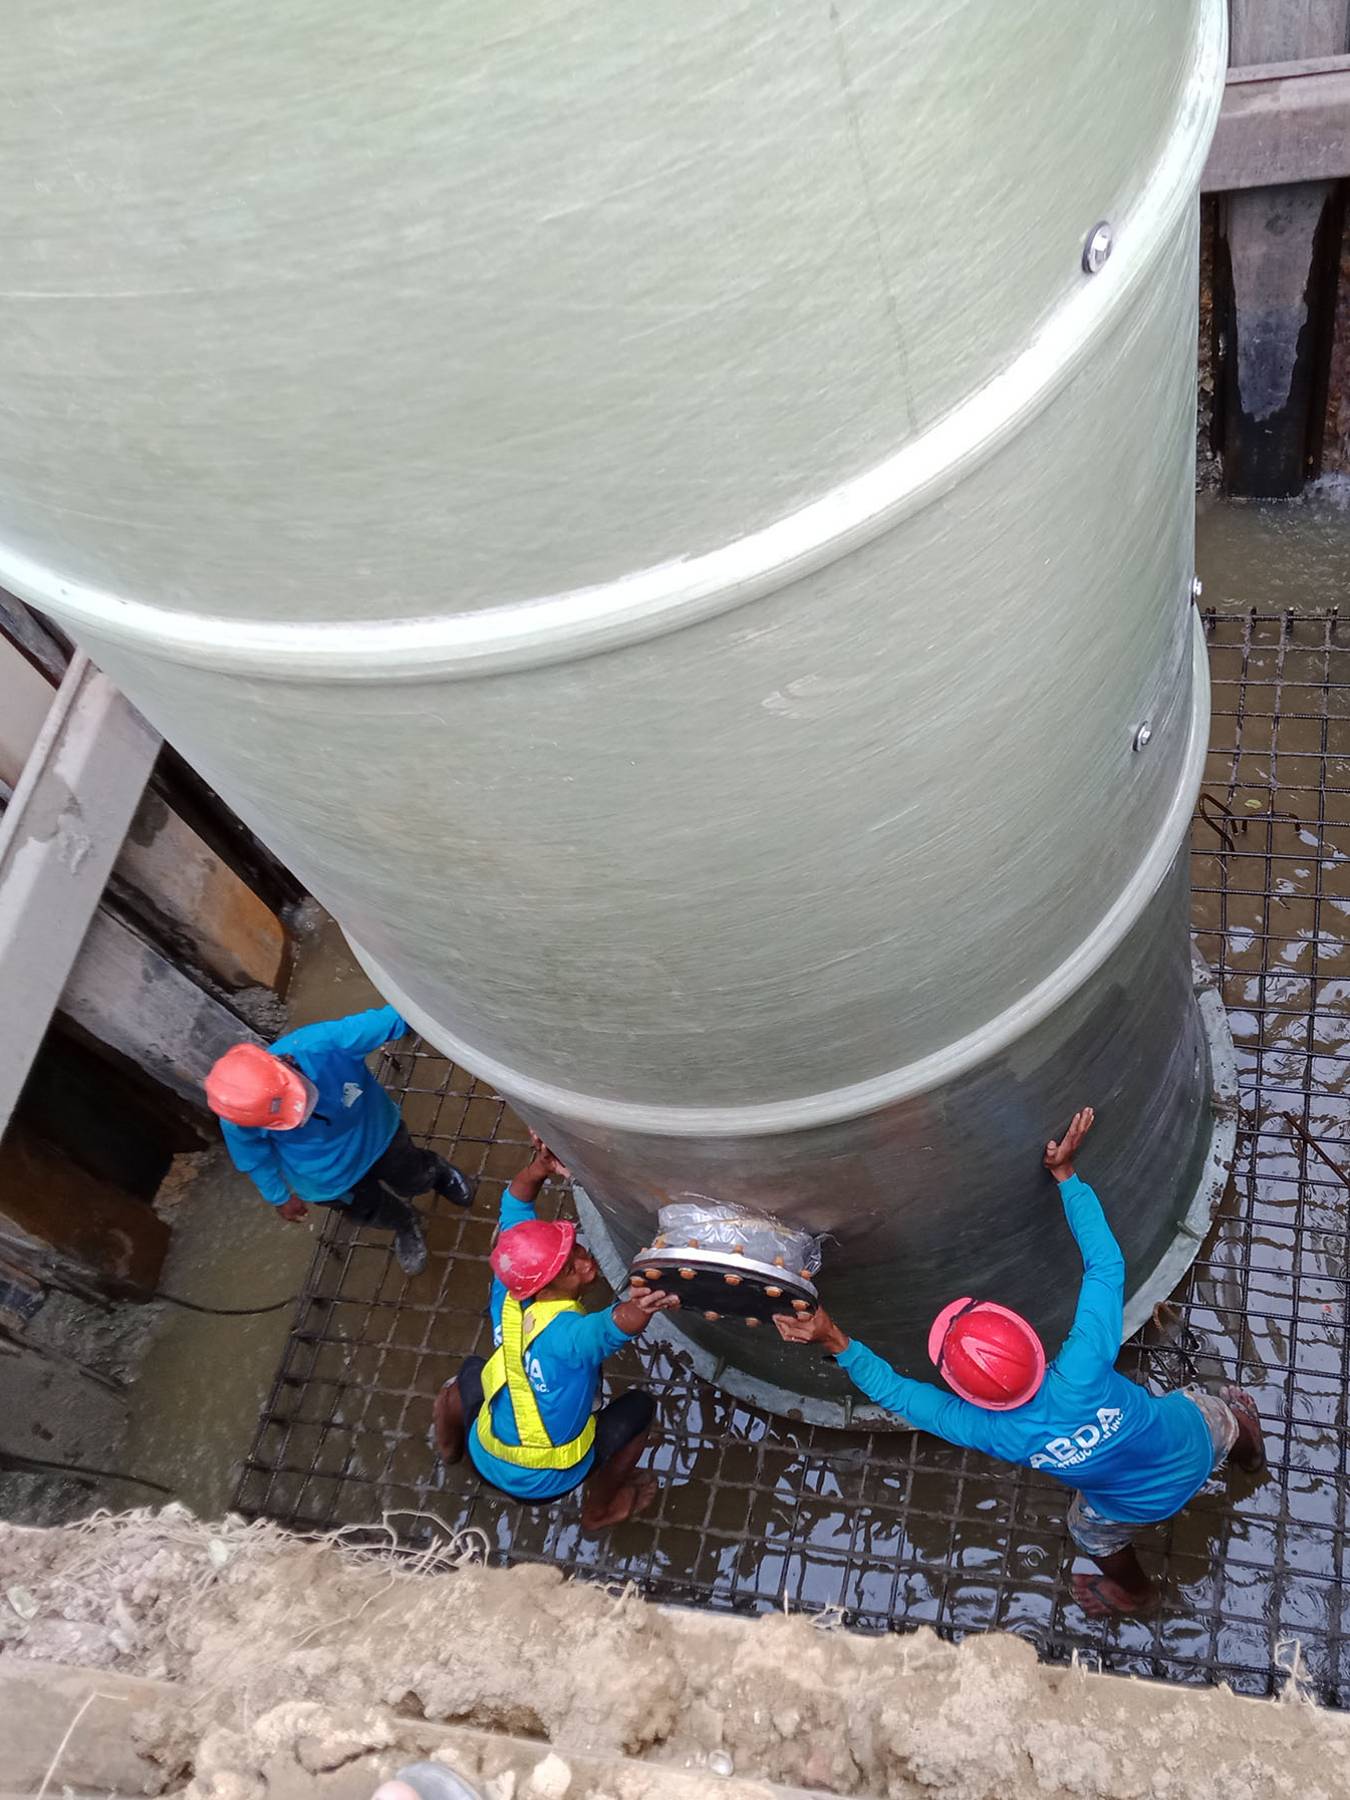 Ready-made pump stations help Philippines' growing water issues